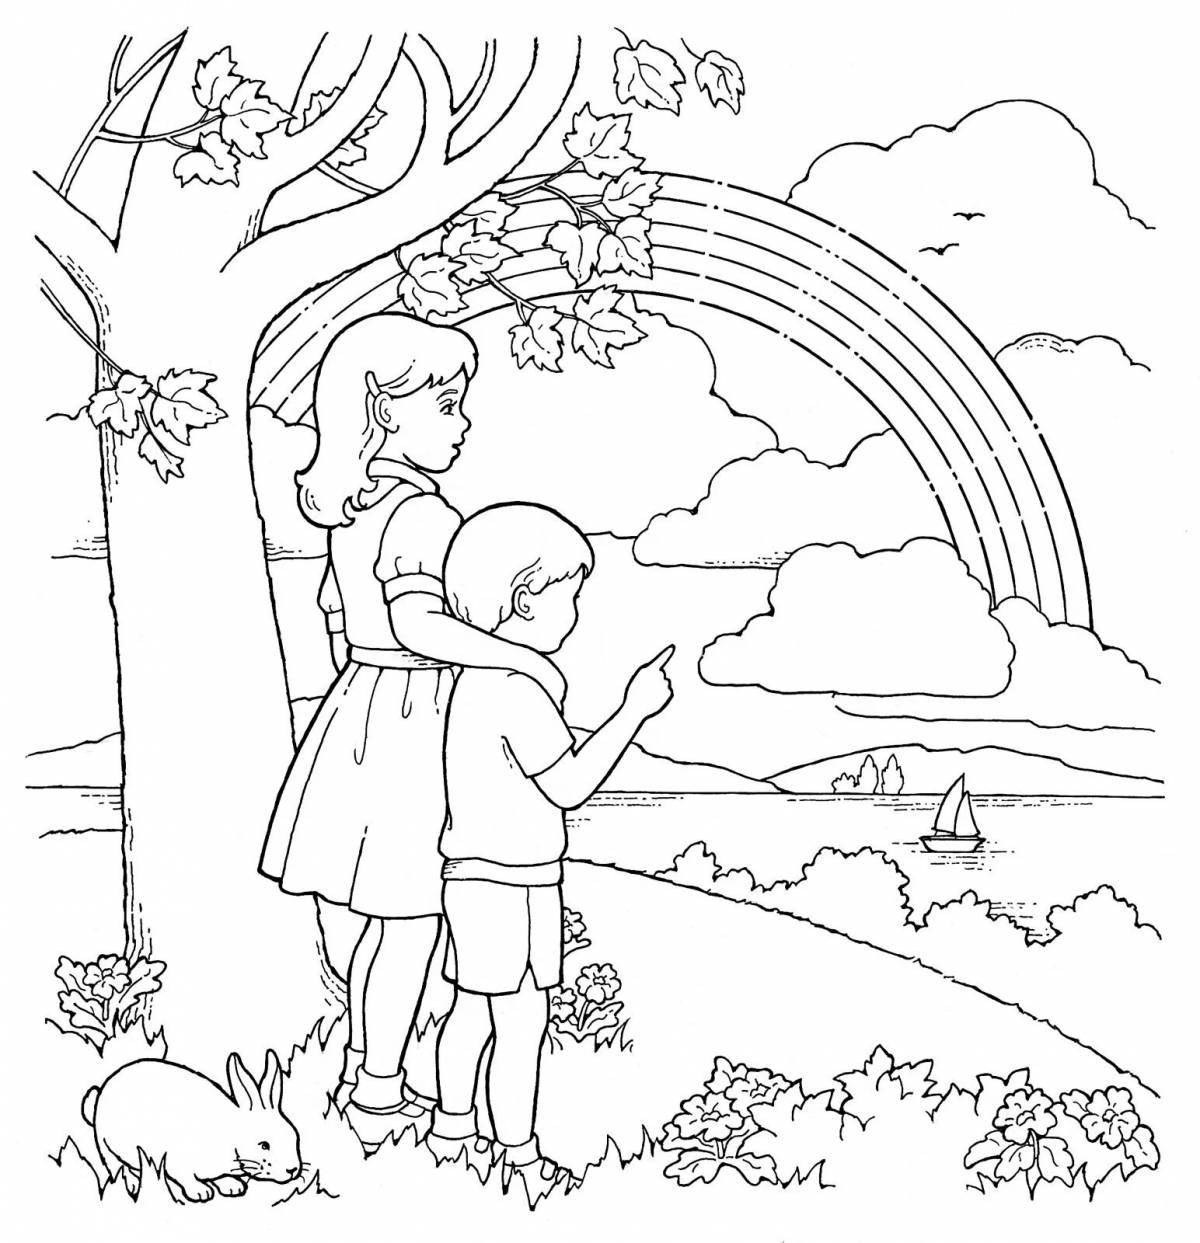 Awesome christian coloring book